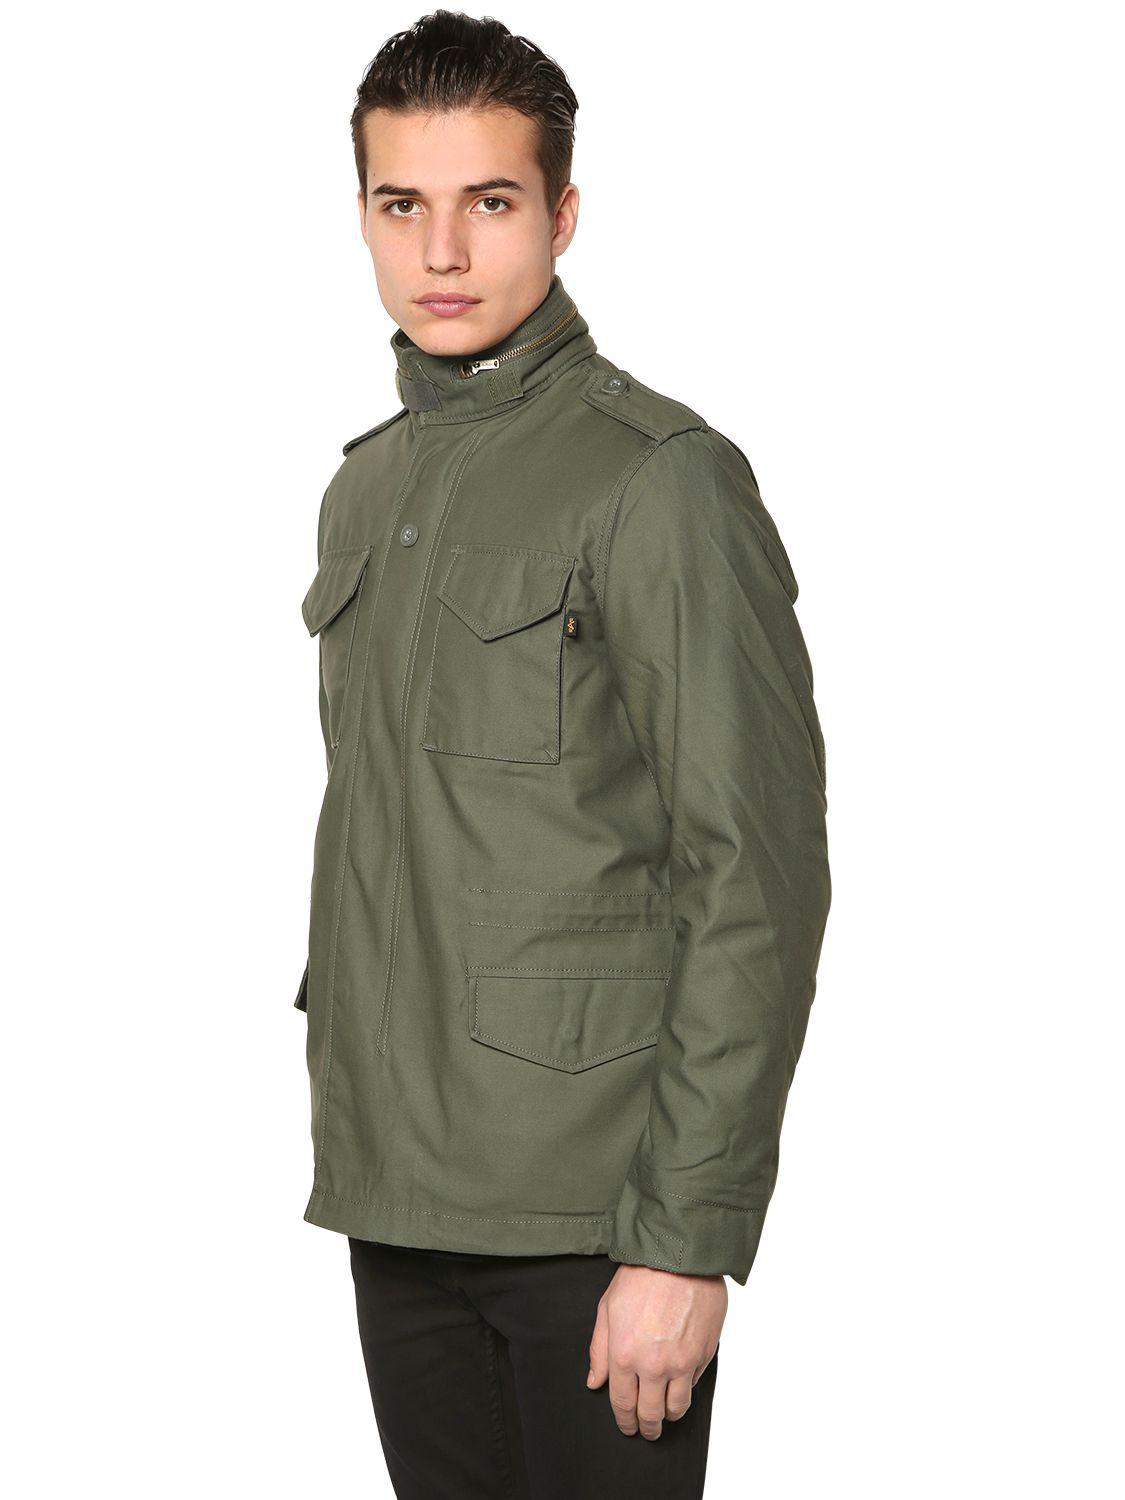 Alpha Industries M-65 Heritage Slim Cotton Field Jacket in Olive Green  (Green) for Men - Lyst